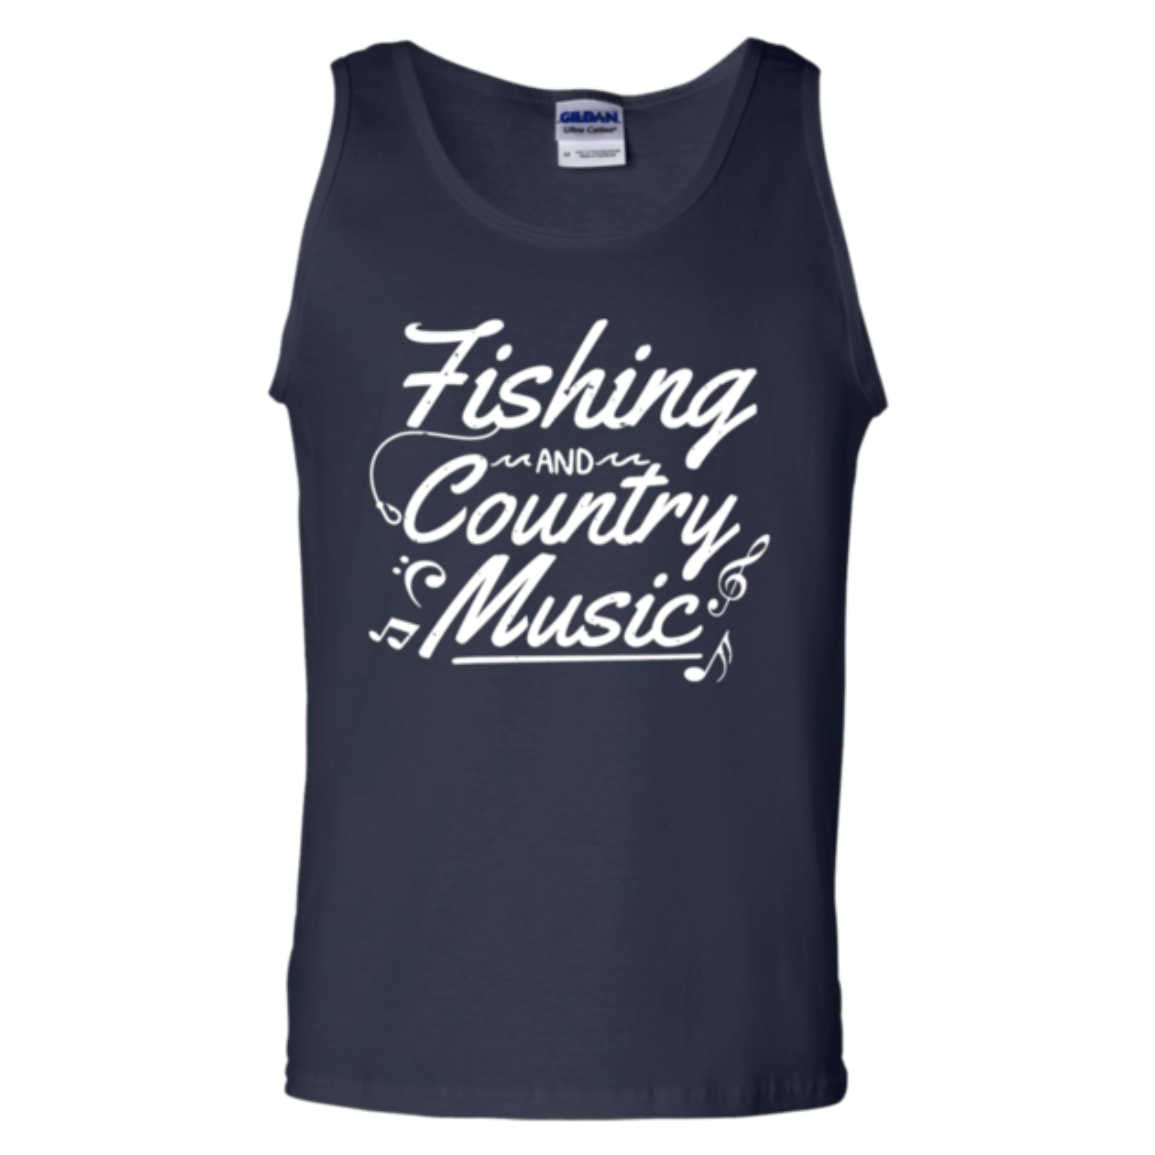 fishing and country Music tank top w black